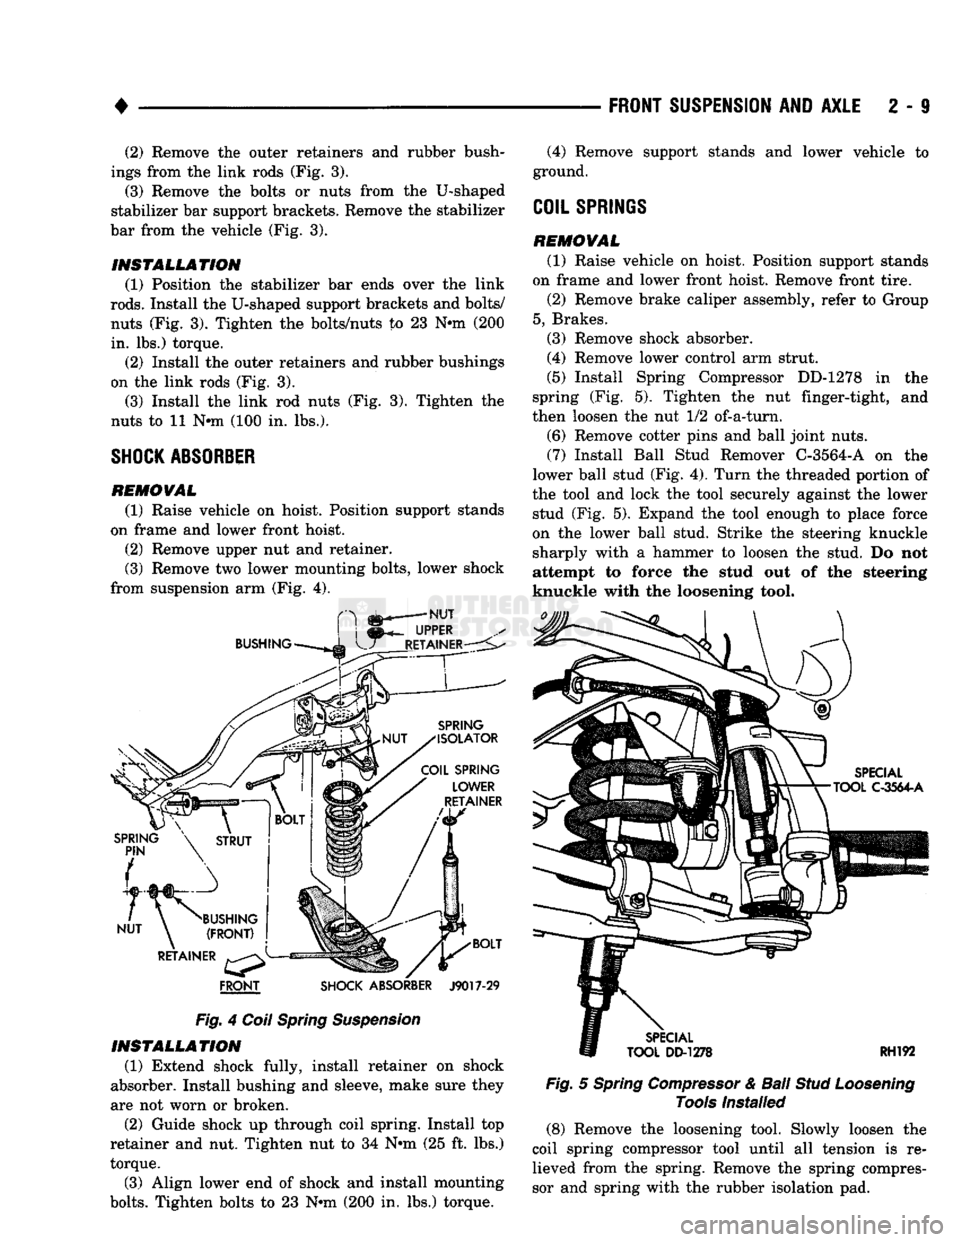 DODGE TRUCK 1993  Service Repair Manual 
4 

FRONT
 SHOCK ABSORBER
 J9017-29 

Fig.
 4
 Coil Spring Suspension  INSTALLATION 

(1) Extend shock fully, install retainer on shock 
absorber. Install bushing and sleeve, make sure they 
are not 